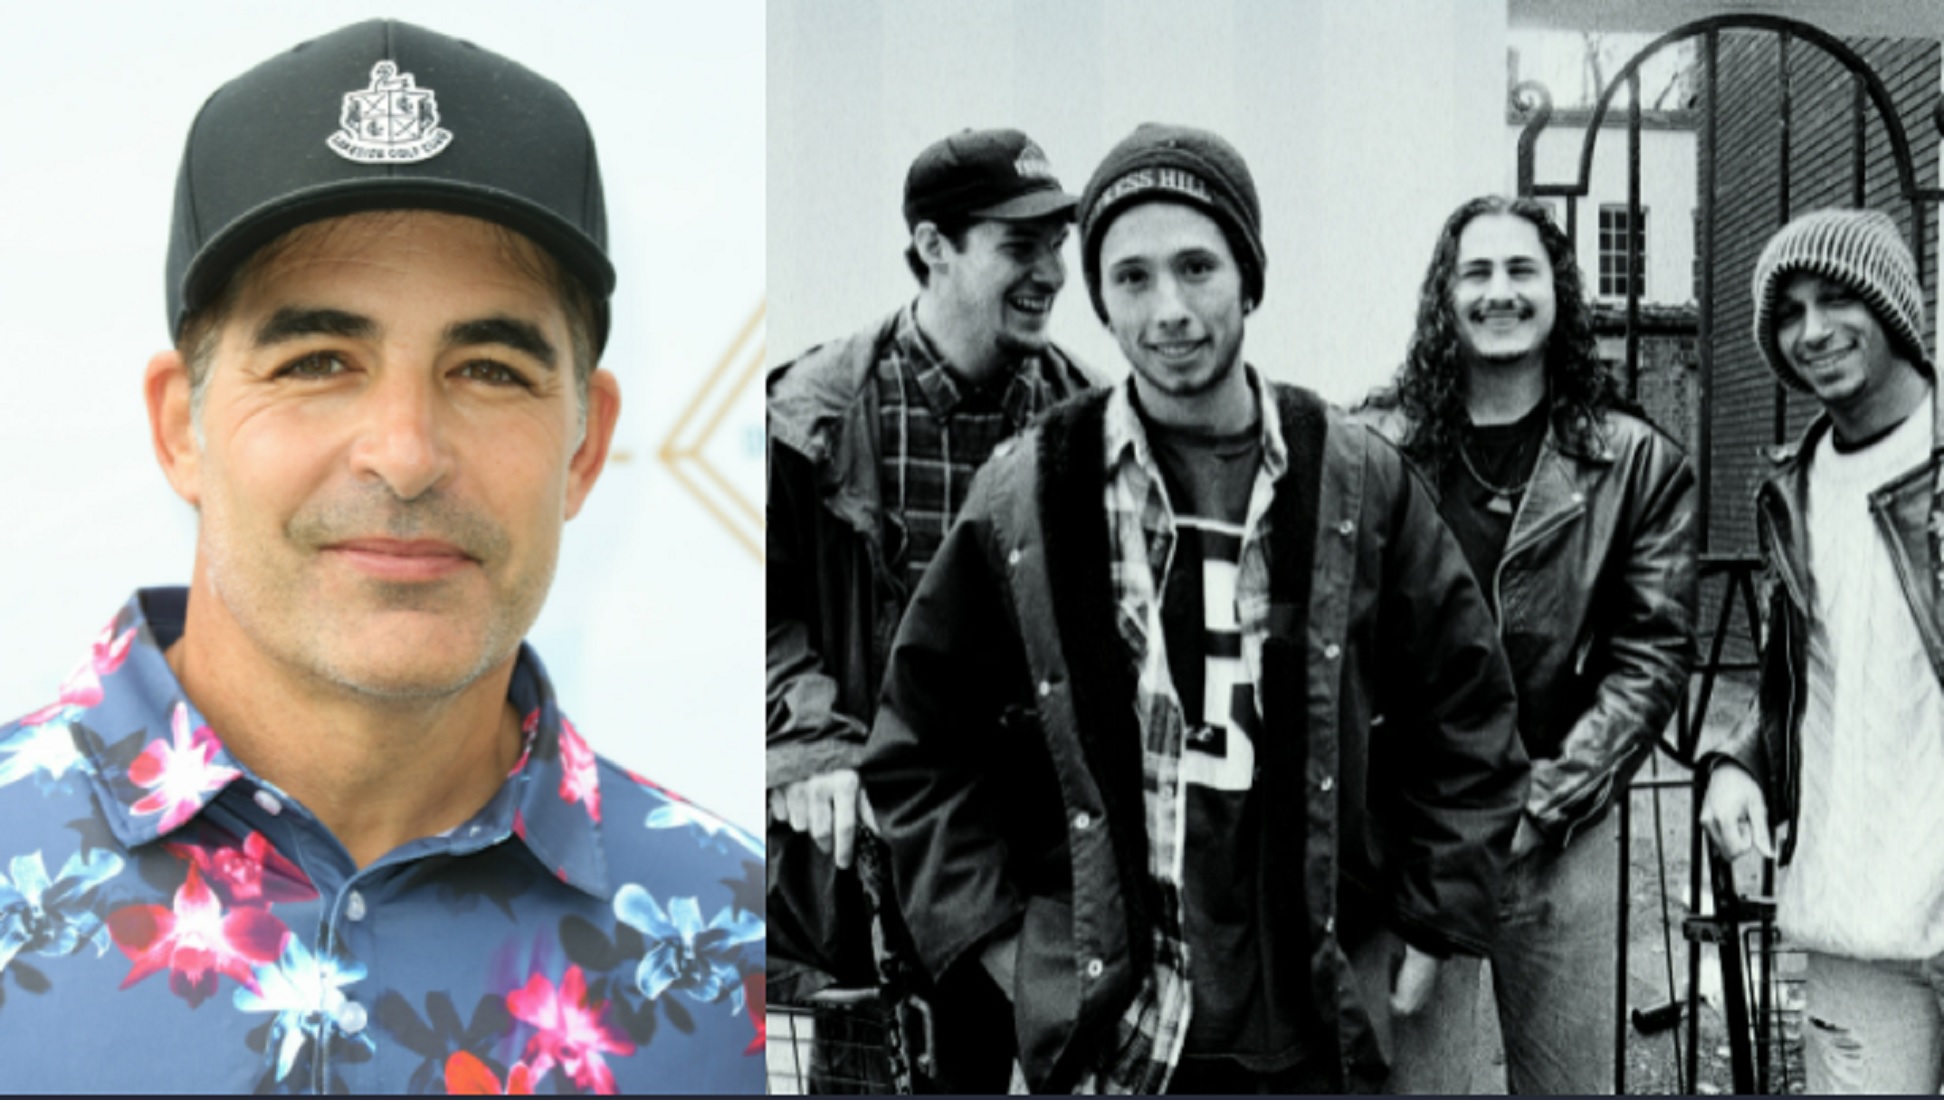 Days of Our Lives star Galen Gering is on the left, Rage Against the Machine is on the right